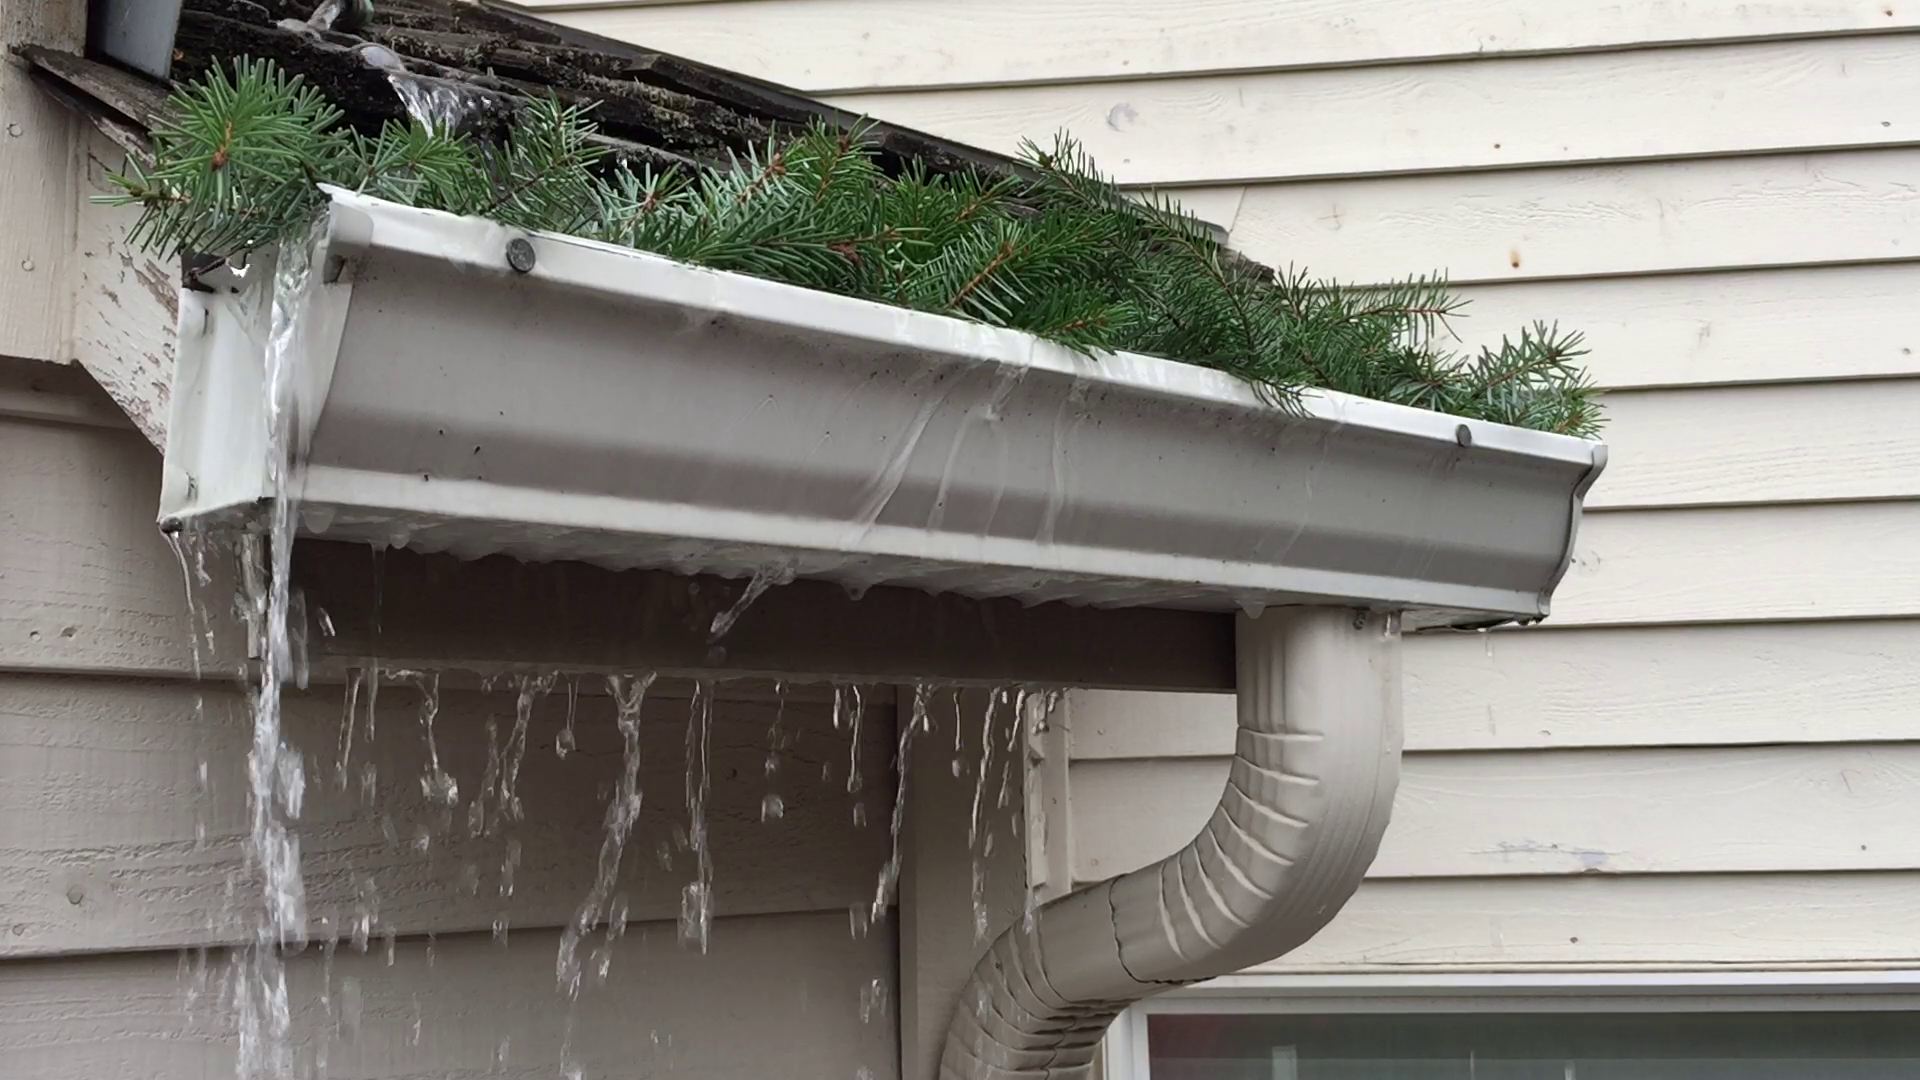 "How can I tell if my gutter problems are *that* bad?" Here's the signs all homeowners should look for and what to do about it. Sponsored by Pine Block.